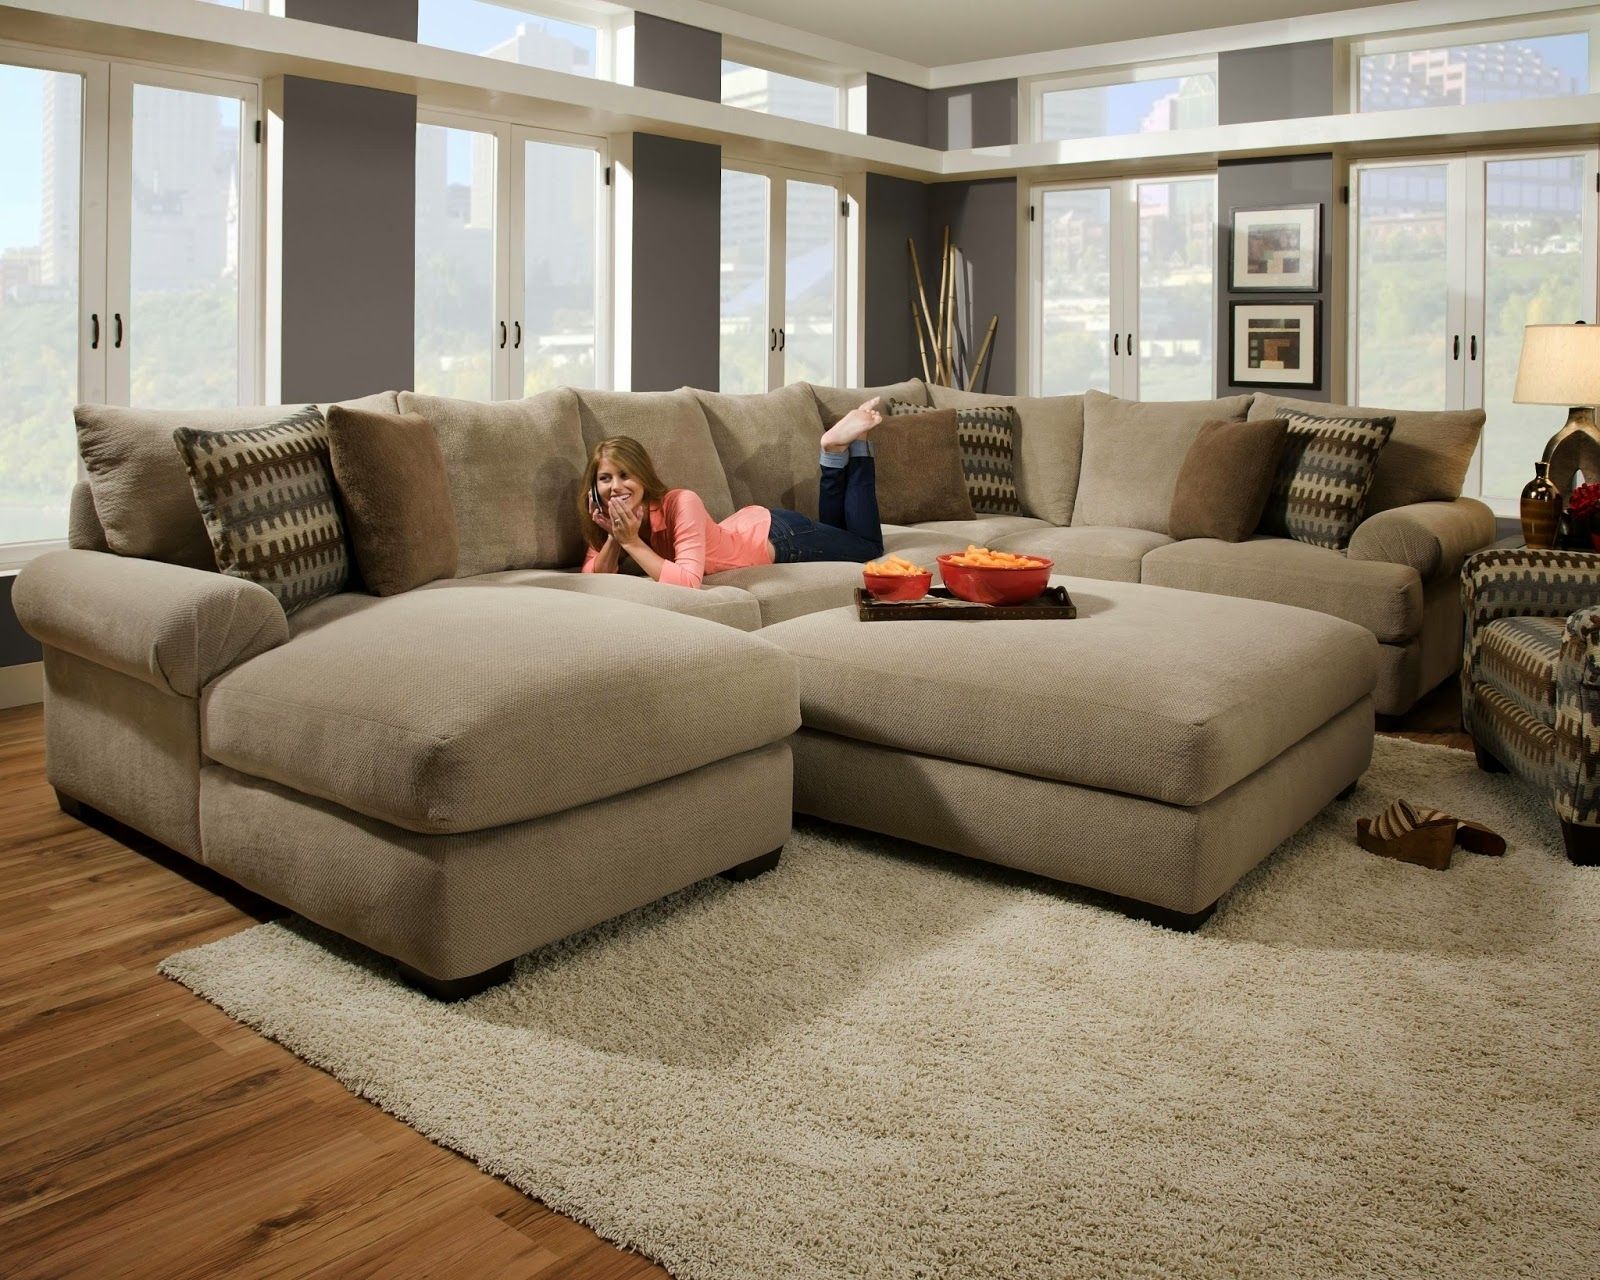 Sectional Sofa With Ottoman – Foter Intended For Sofas With Ottomans (View 2 of 15)